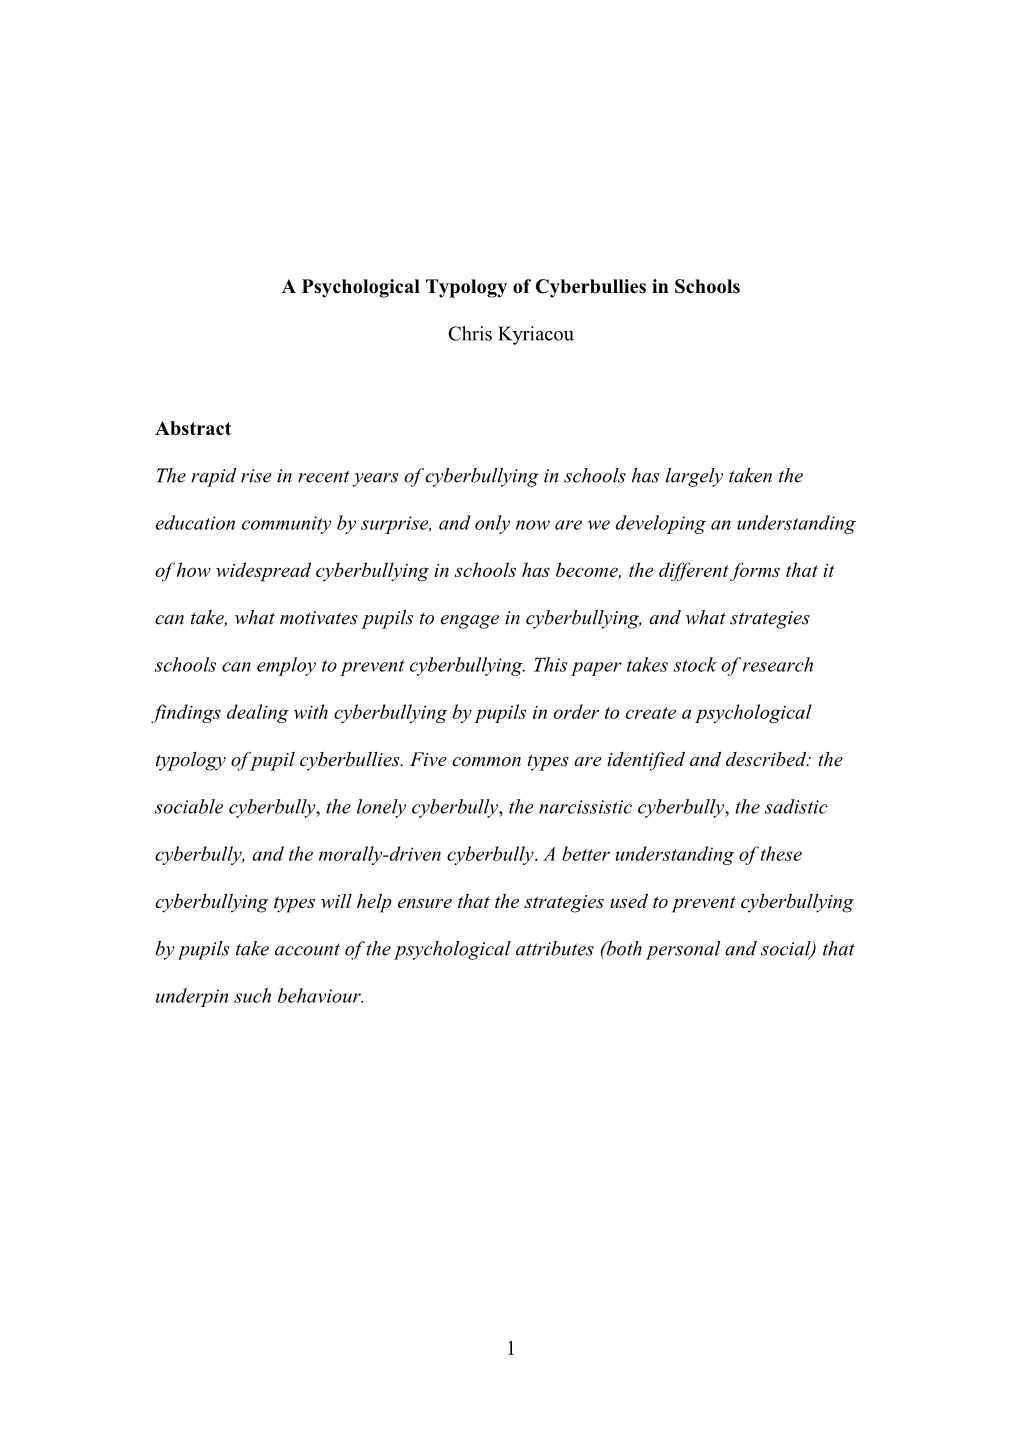 A Psychological Typology of Cyberbullies in Schools